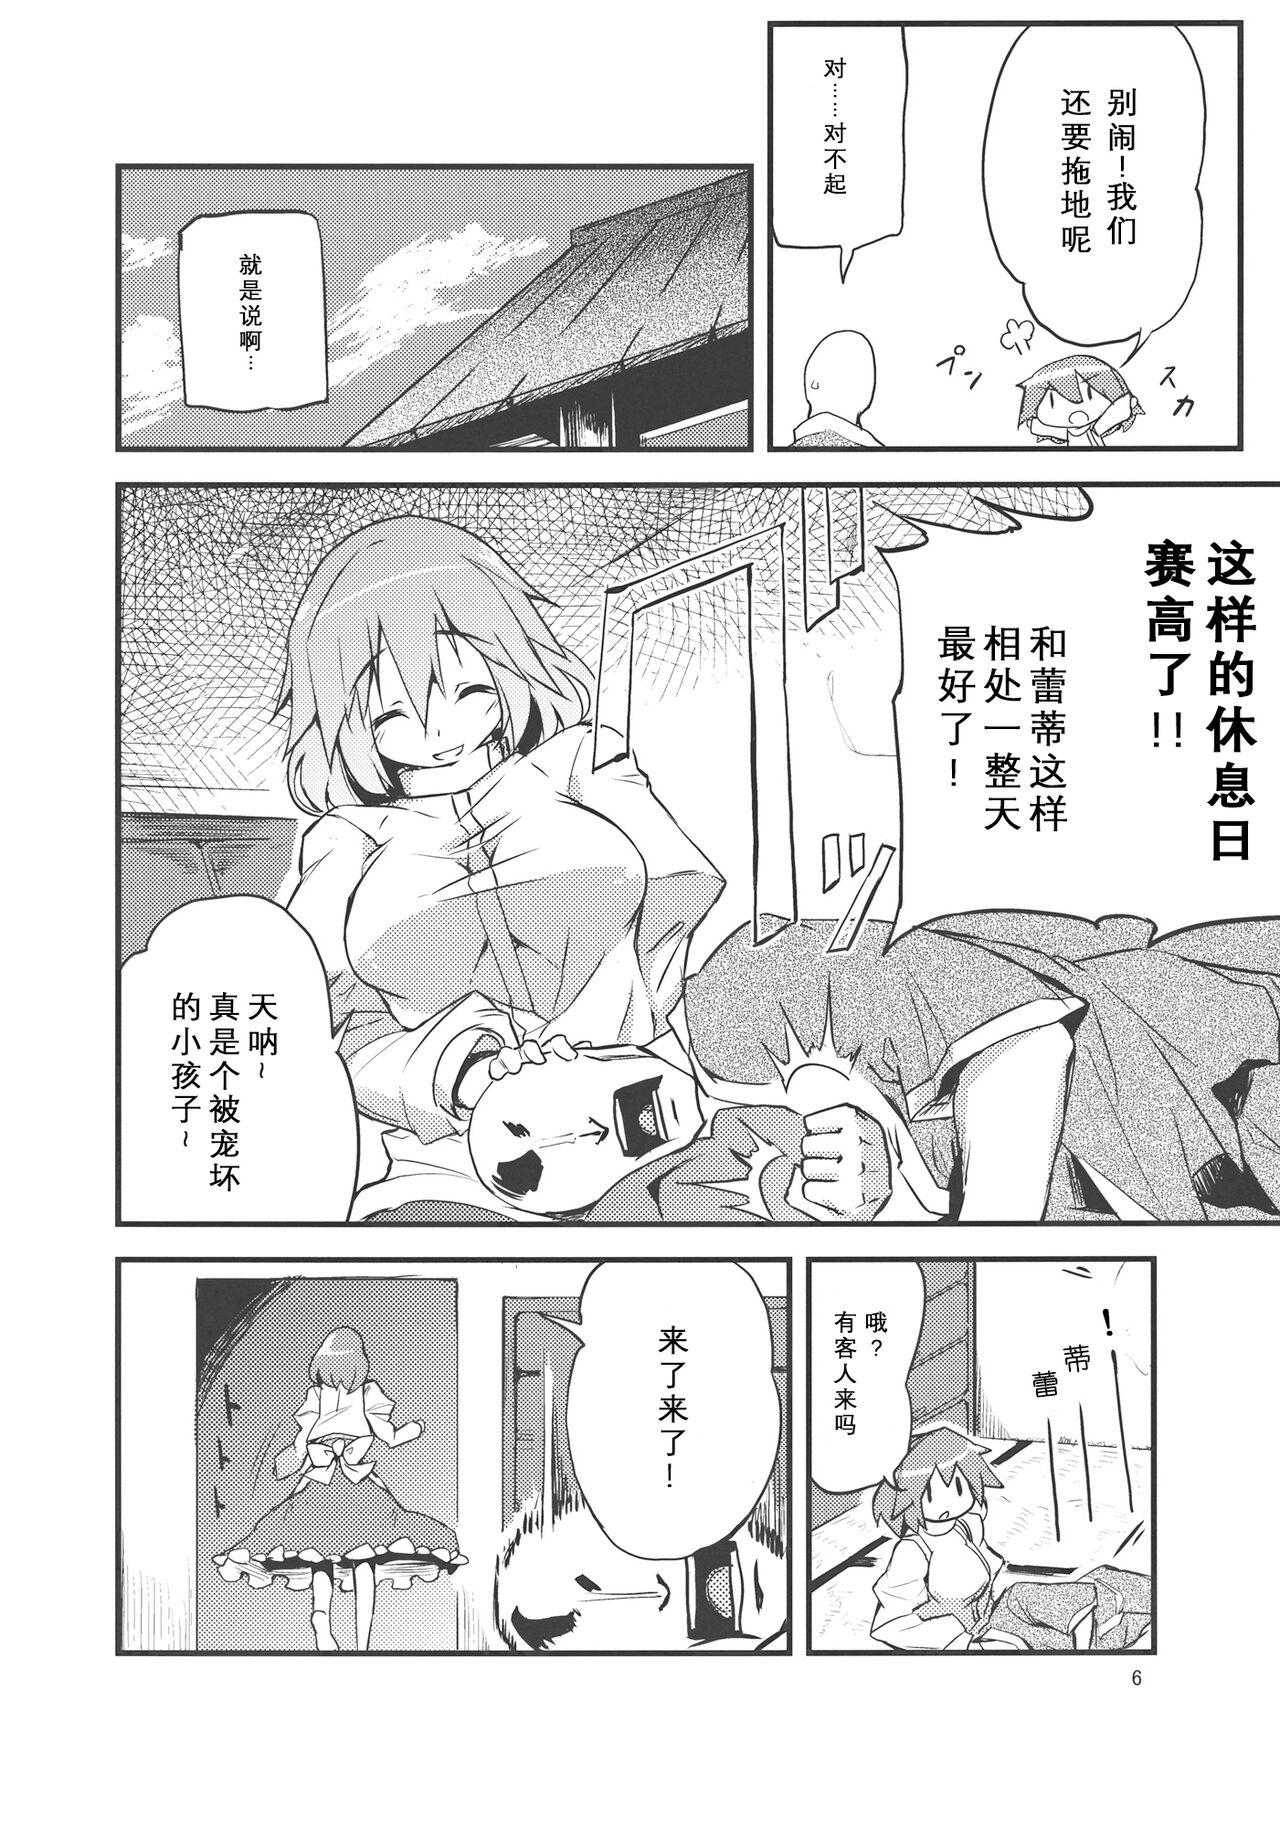 Smooth x Letty | ×蕾蒂 - Touhou project Porn Pussy - Page 6